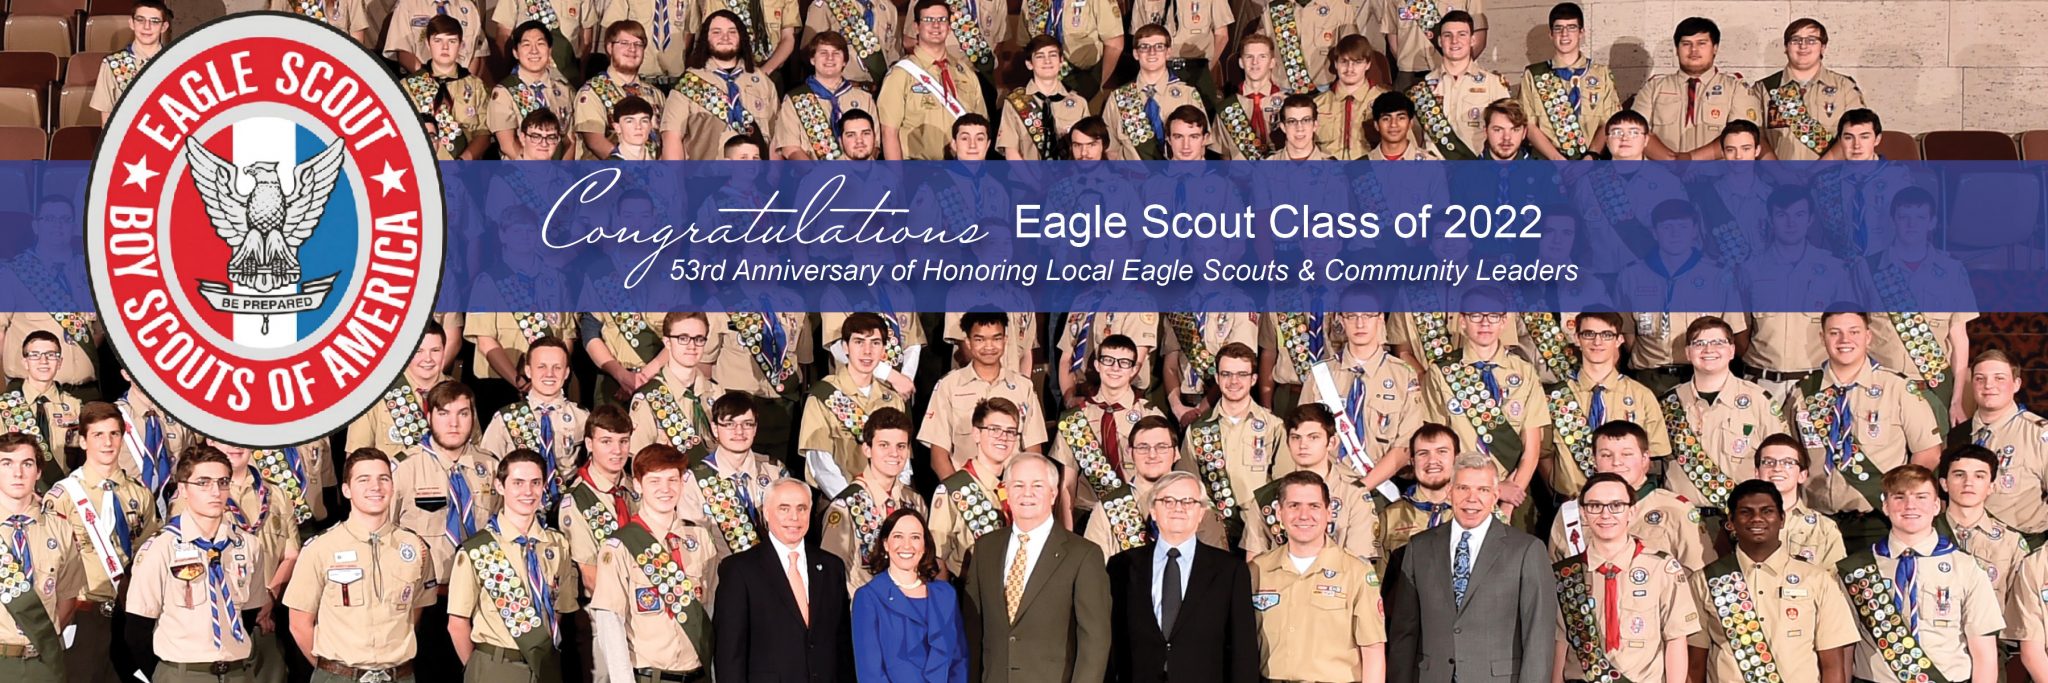 Court of Honor ceremony honors local Eagle Scouts - Pleasanton Express